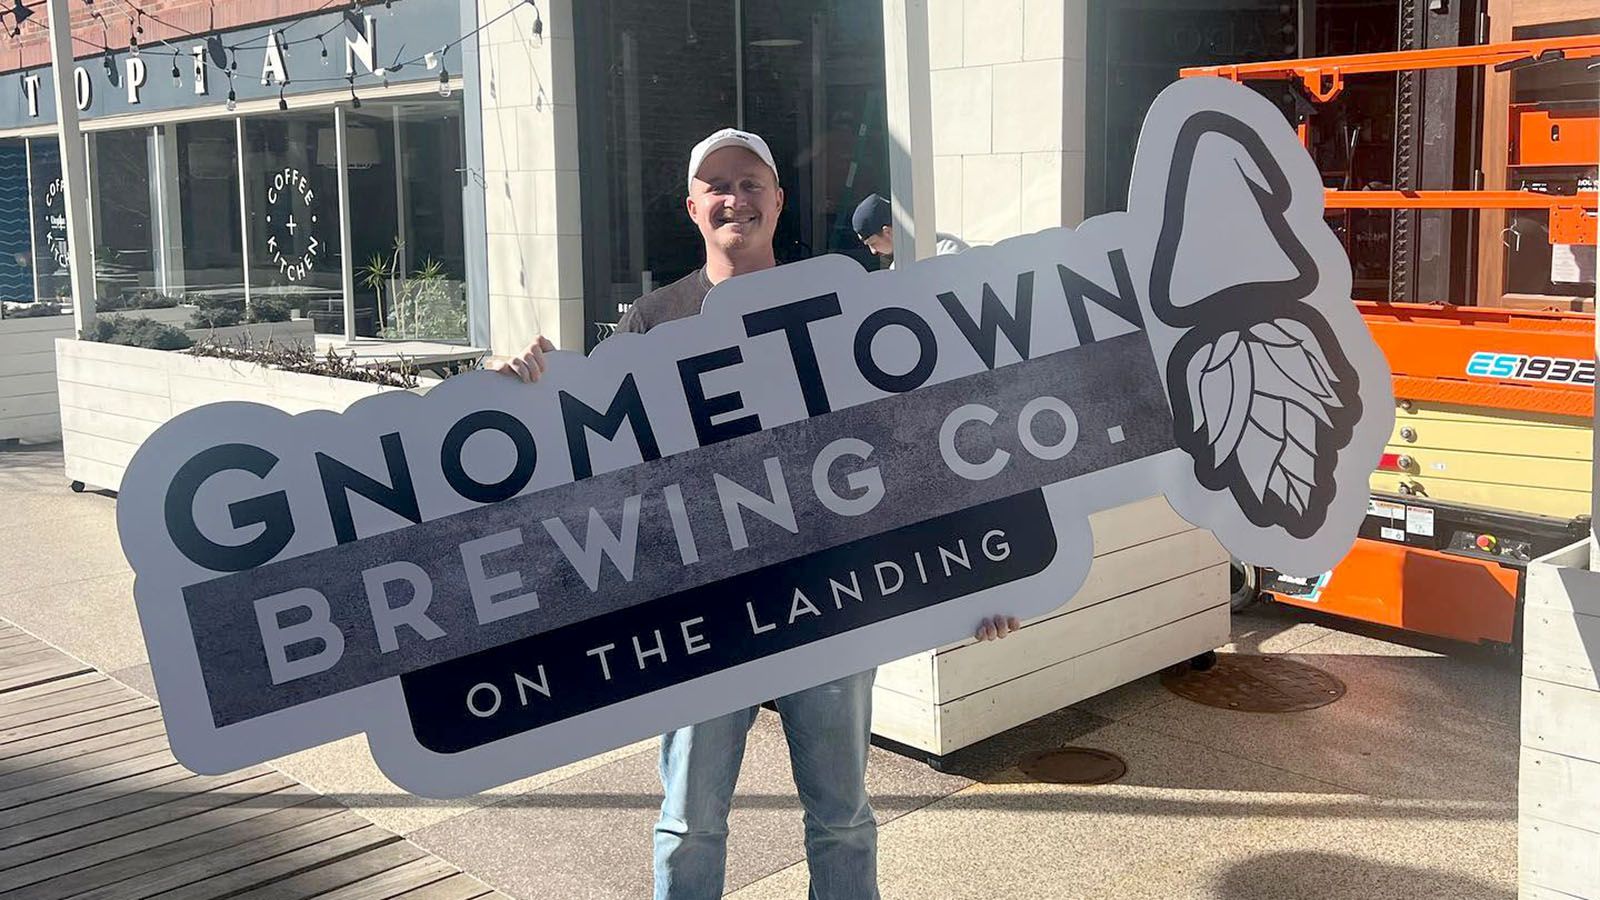 Following a partnership with ObiCai Restaurant Group, Landing Beer Co. is now known as GnomeTown Brewing Co. on The Landing